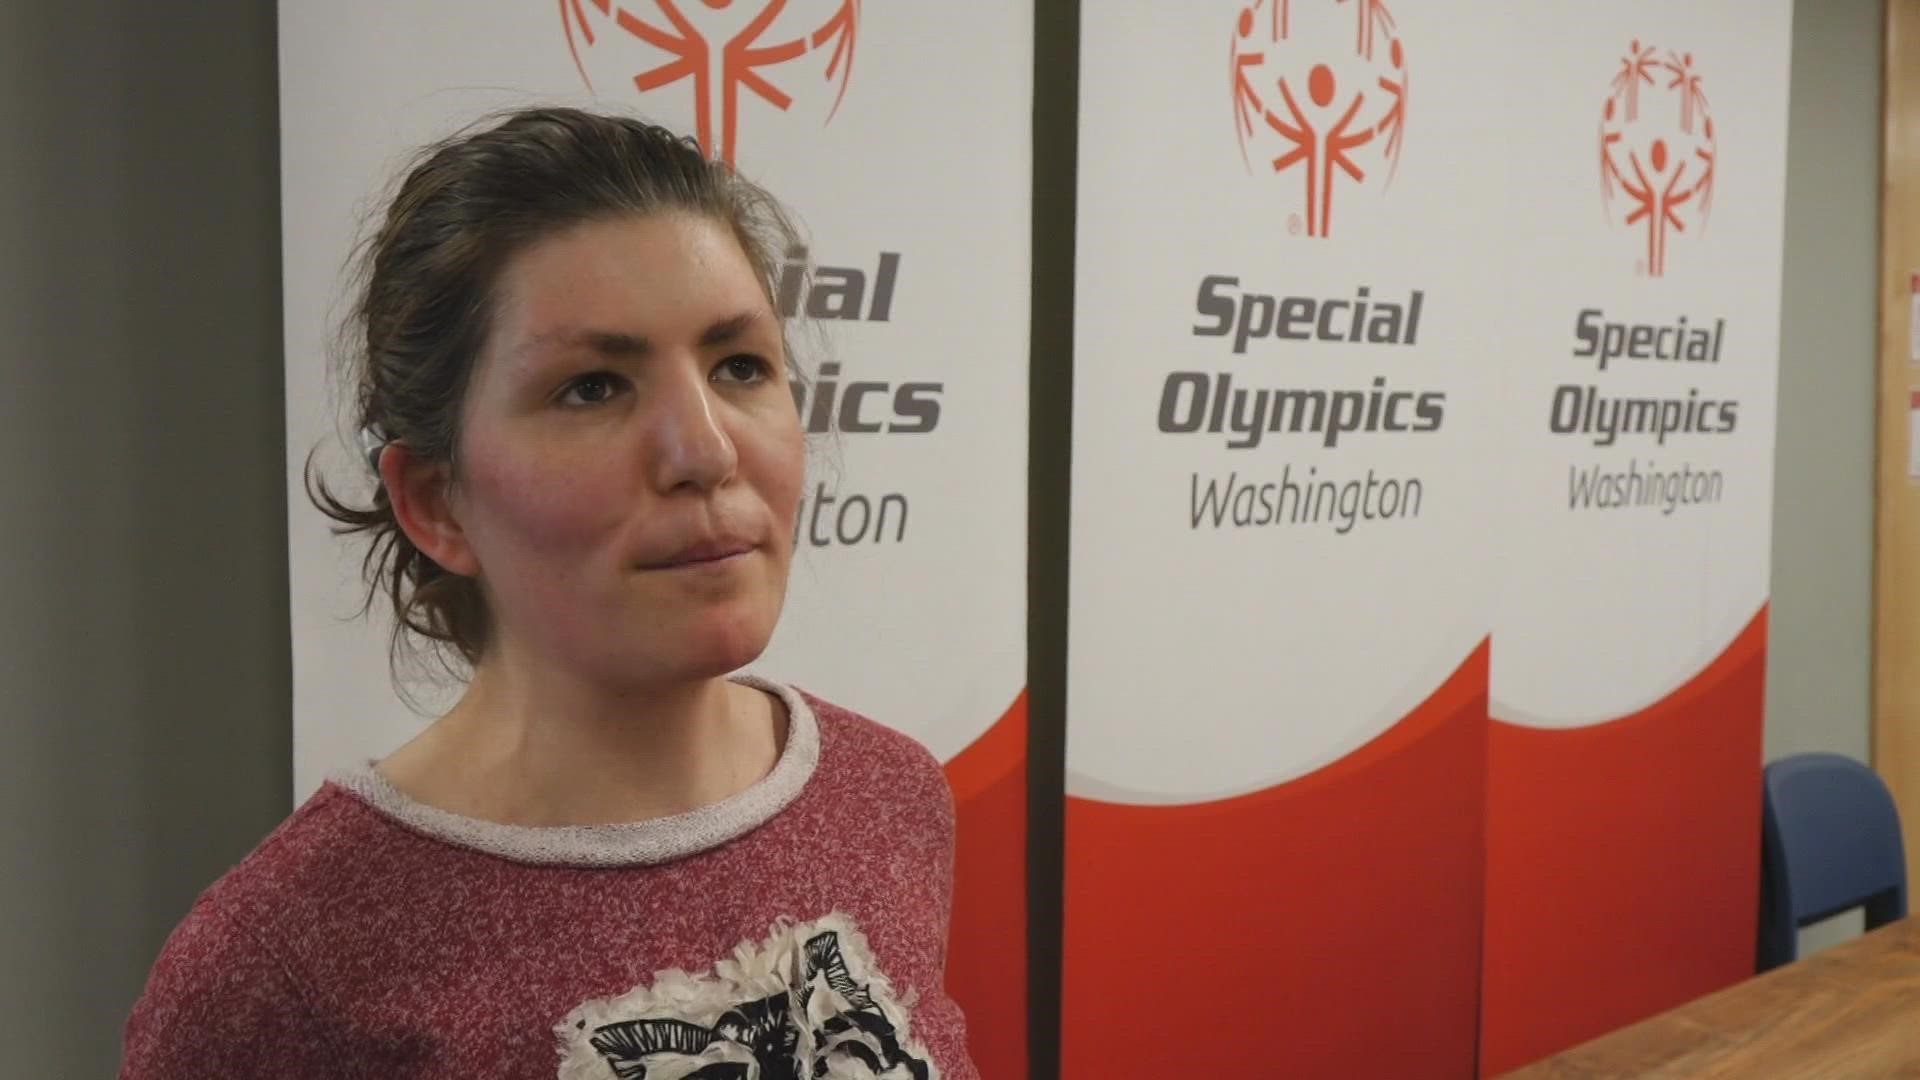 Special Olympics Washington is making history by naming one of their athletes to become the chair of the board of directors.